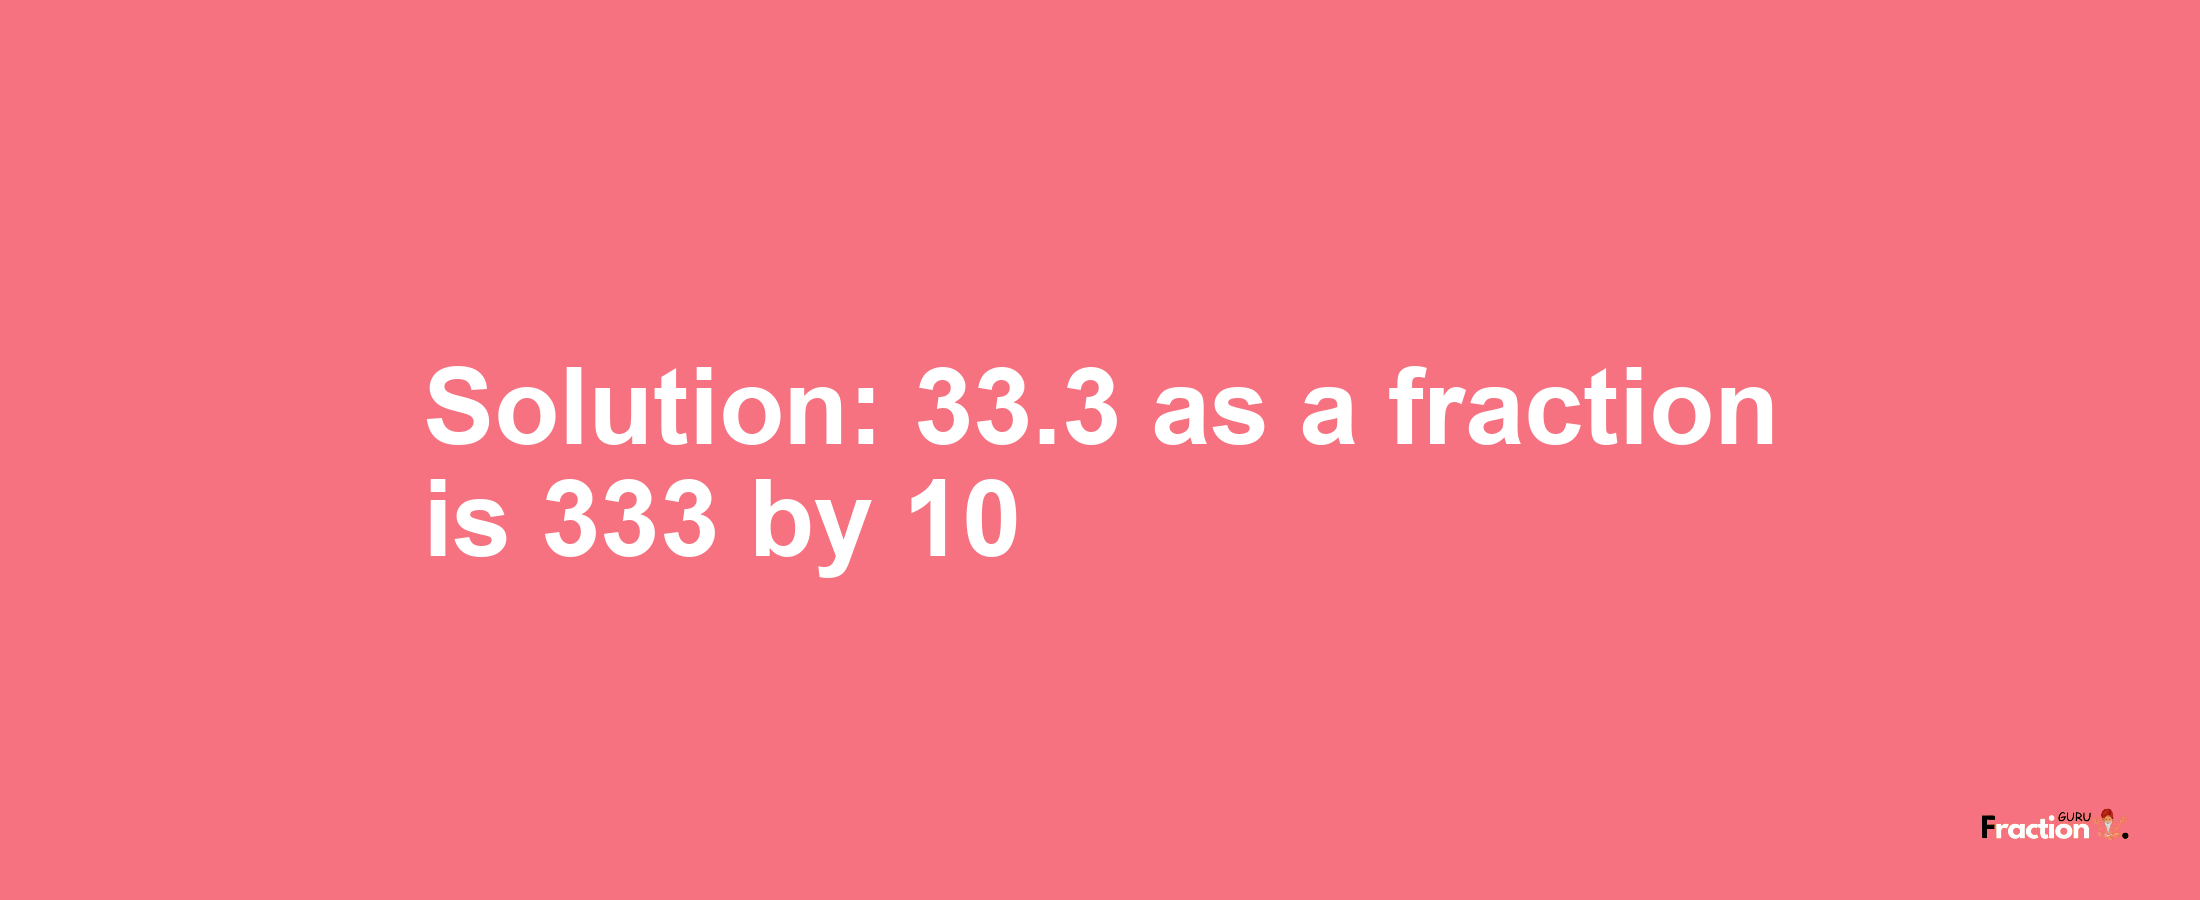 Solution:33.3 as a fraction is 333/10